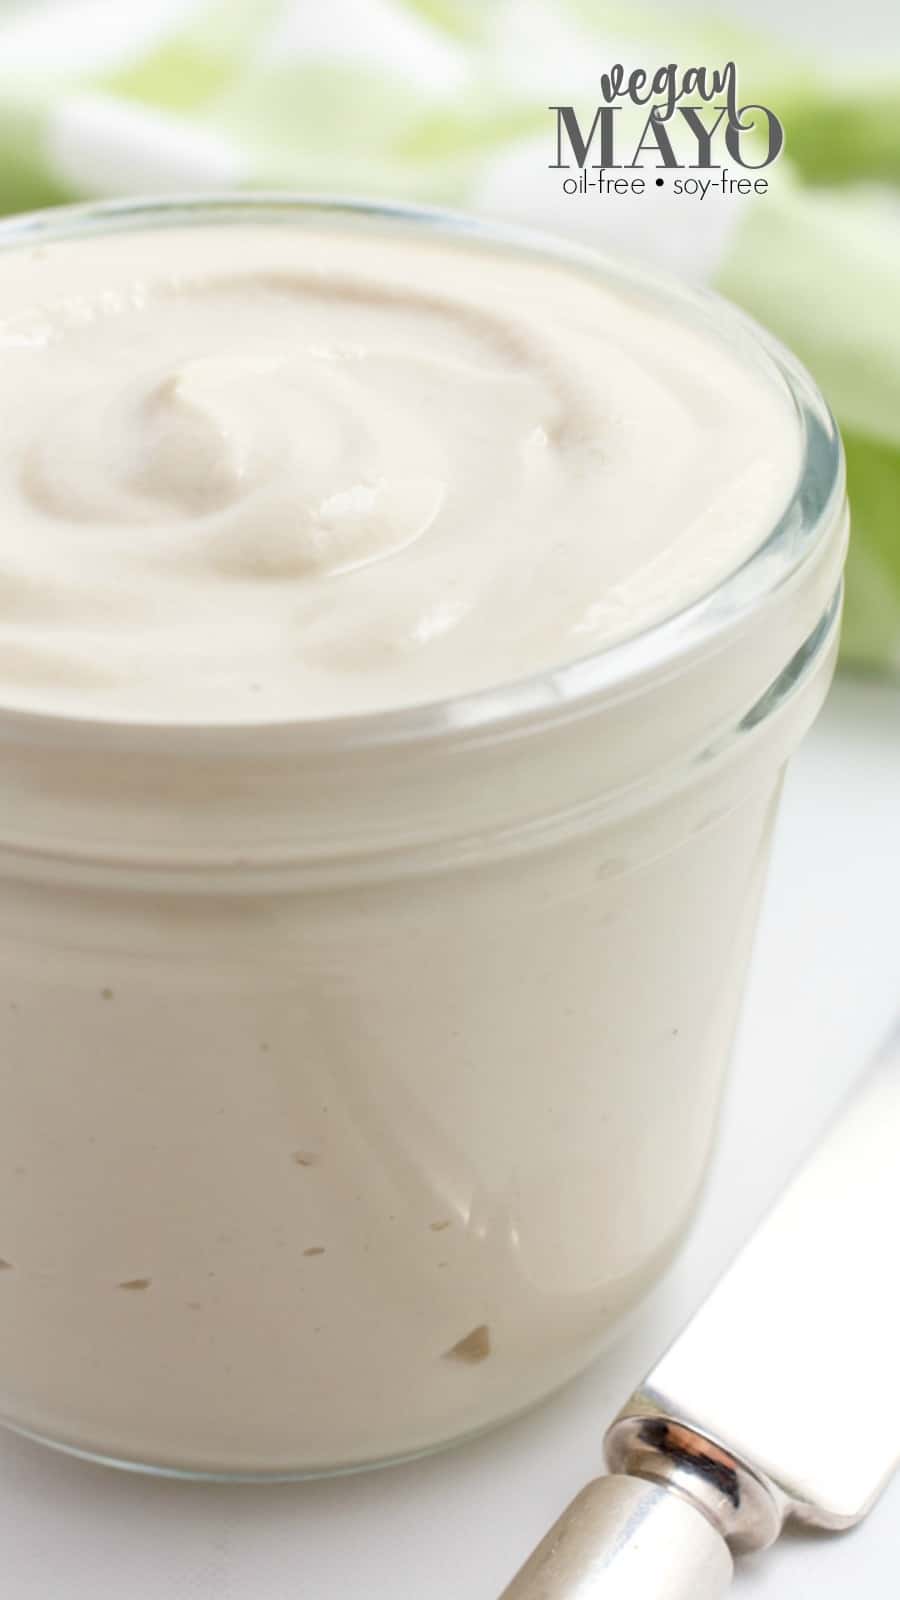 Vegan mayo with writing for Pinterest.